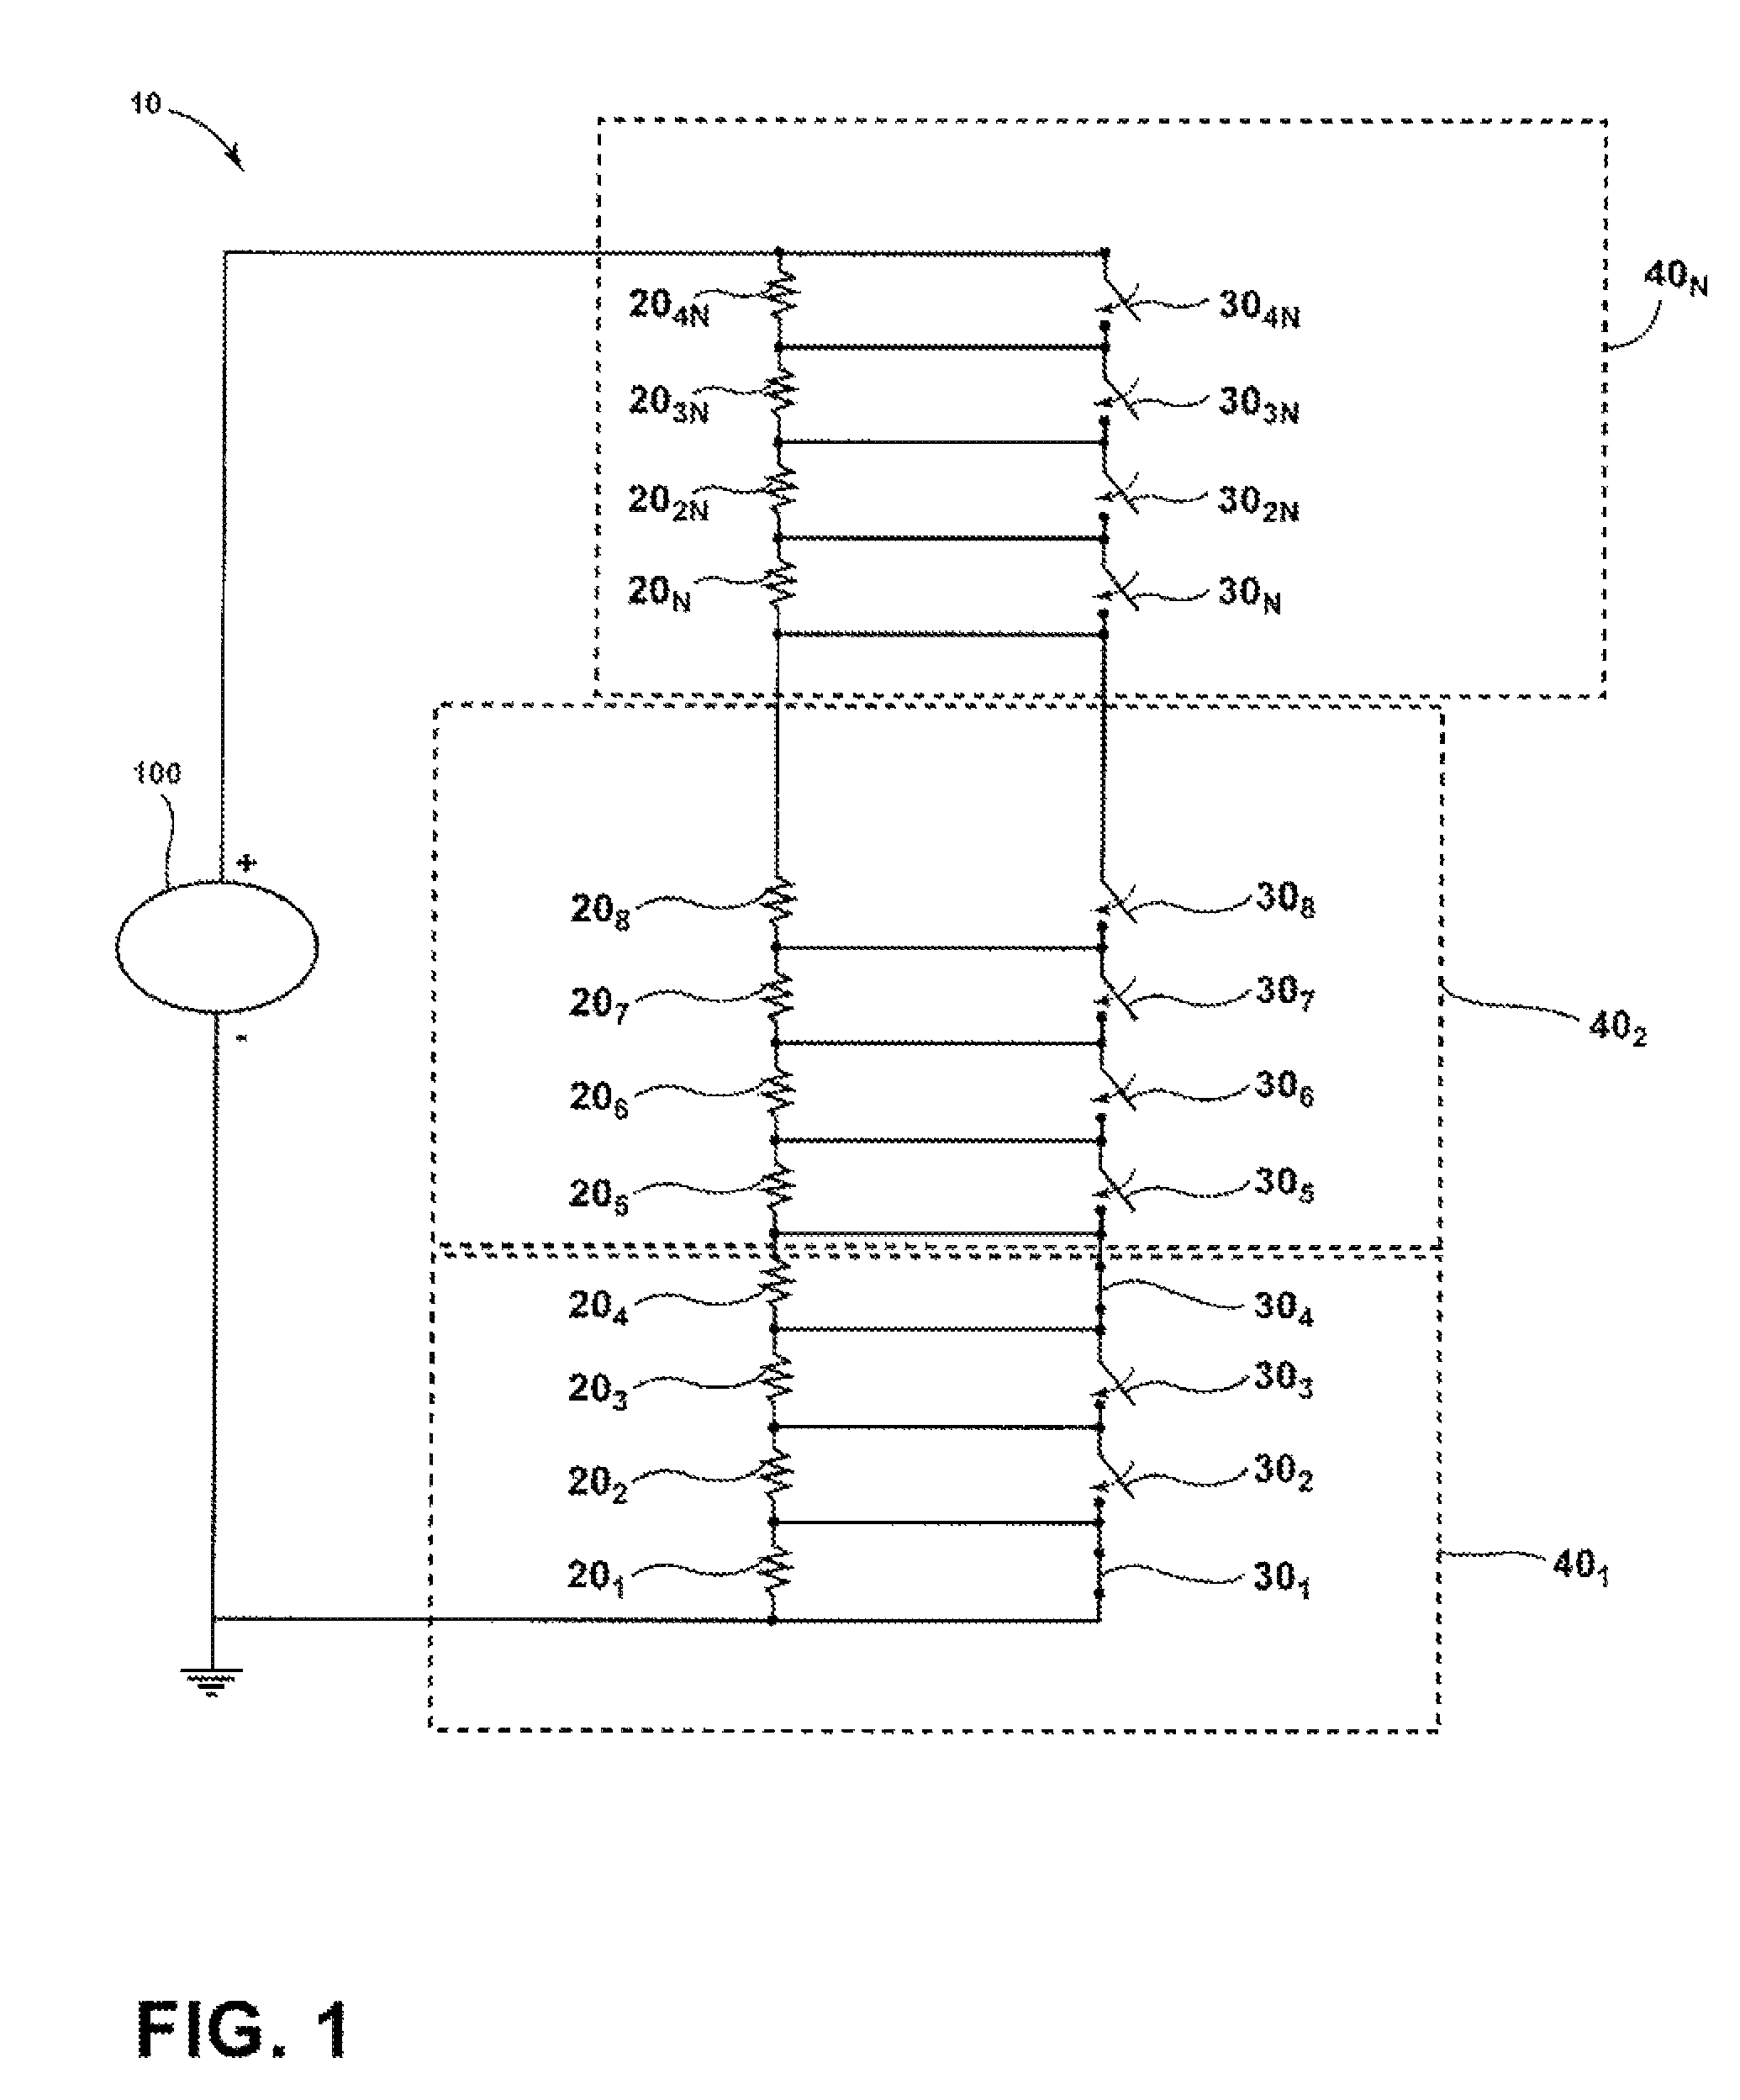 Binary coded decimal resistive load and network